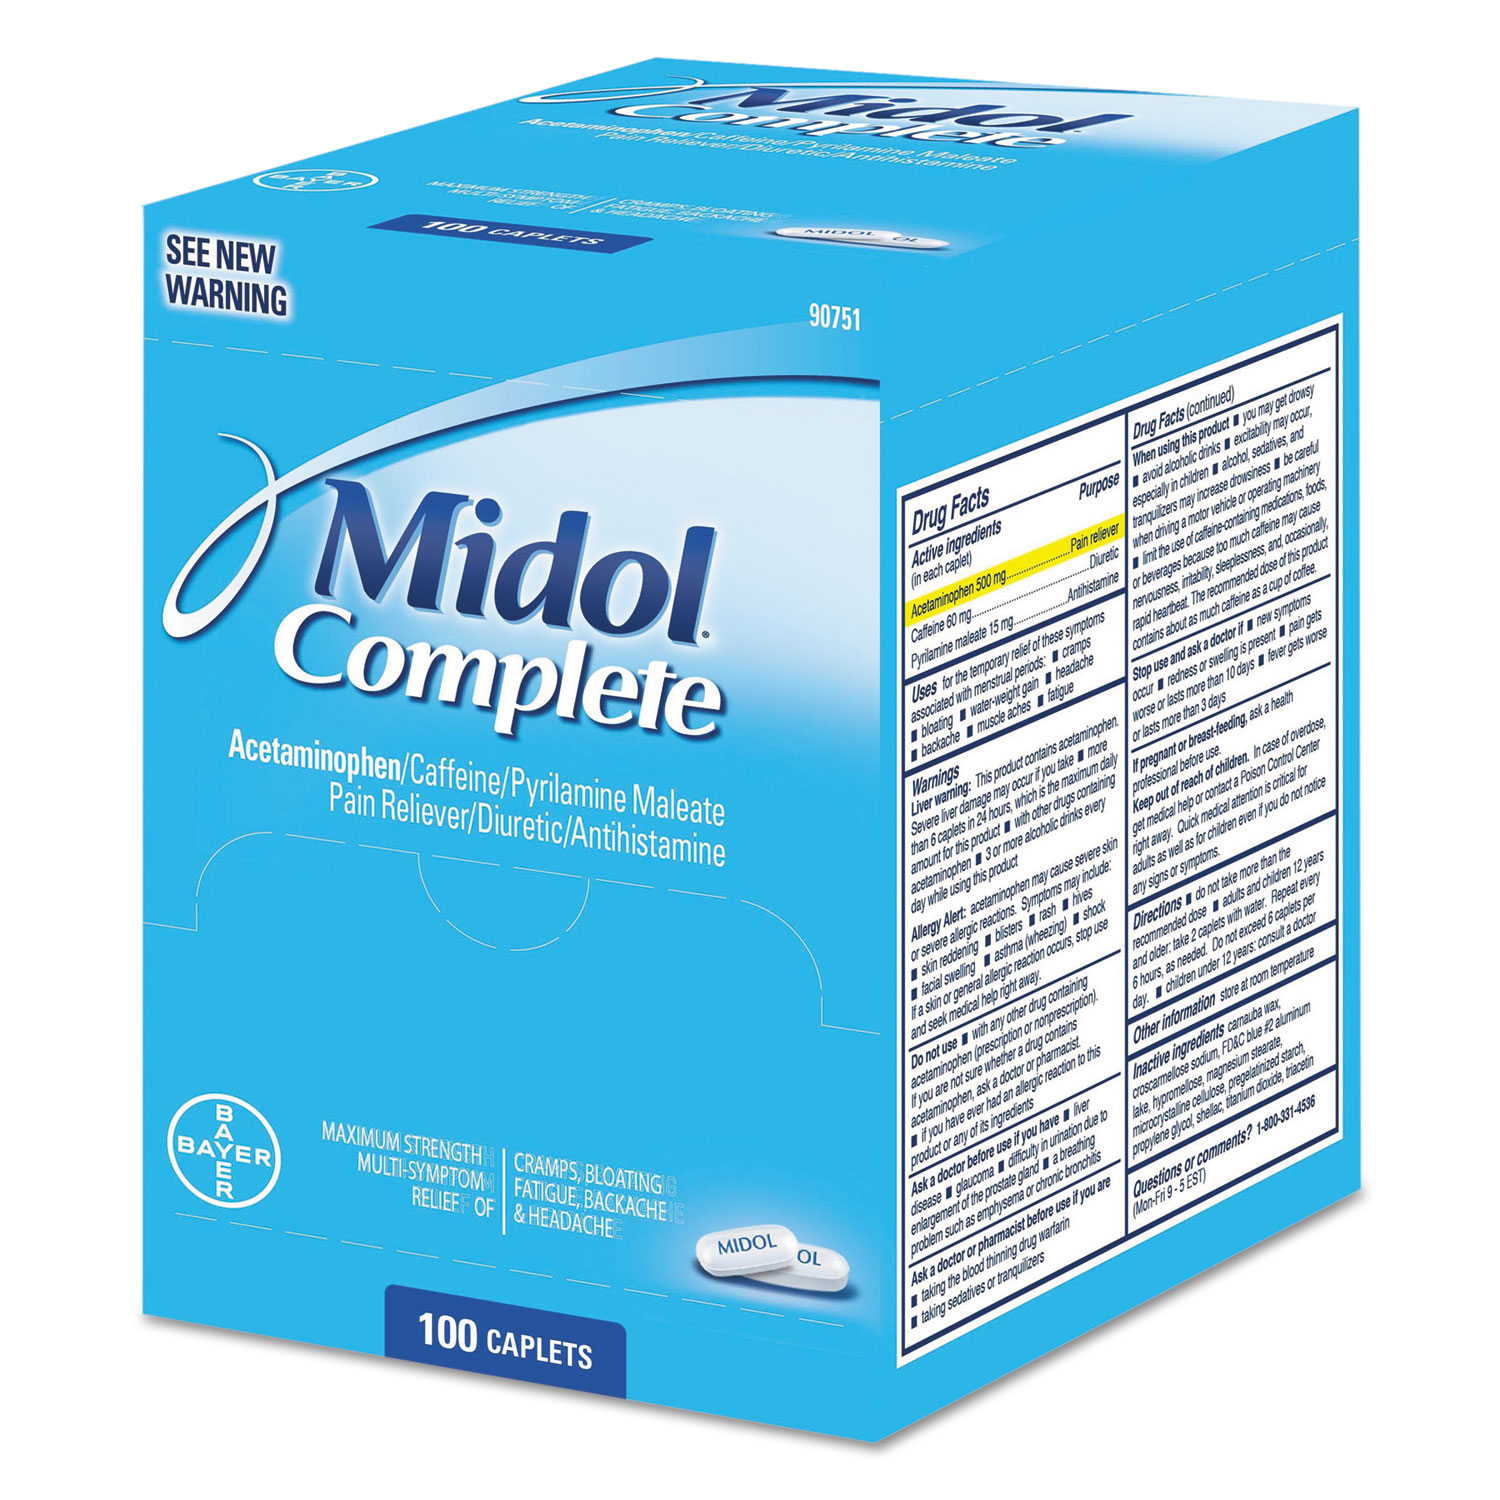  Midol 90751 Complete Menstrual Caplets, Two-Pack, 50 Packs/Box (FAO90751) 